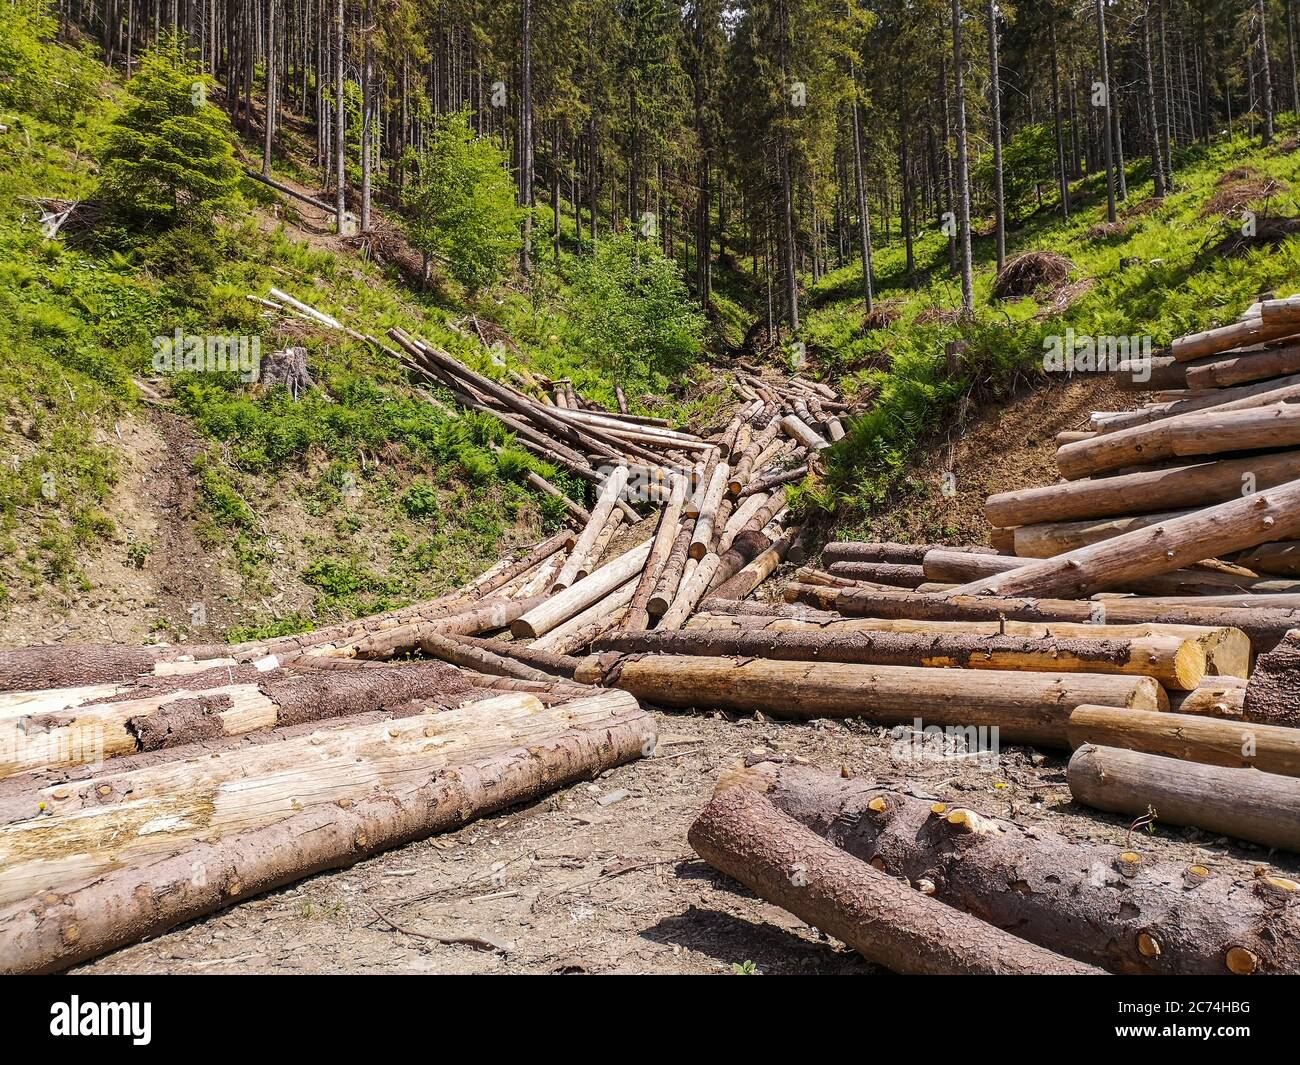 Spruce timber logging area high in the Carpathian mountains. Pile of cut pine logs bounding down the side of the hills like a stream. Stock Photo